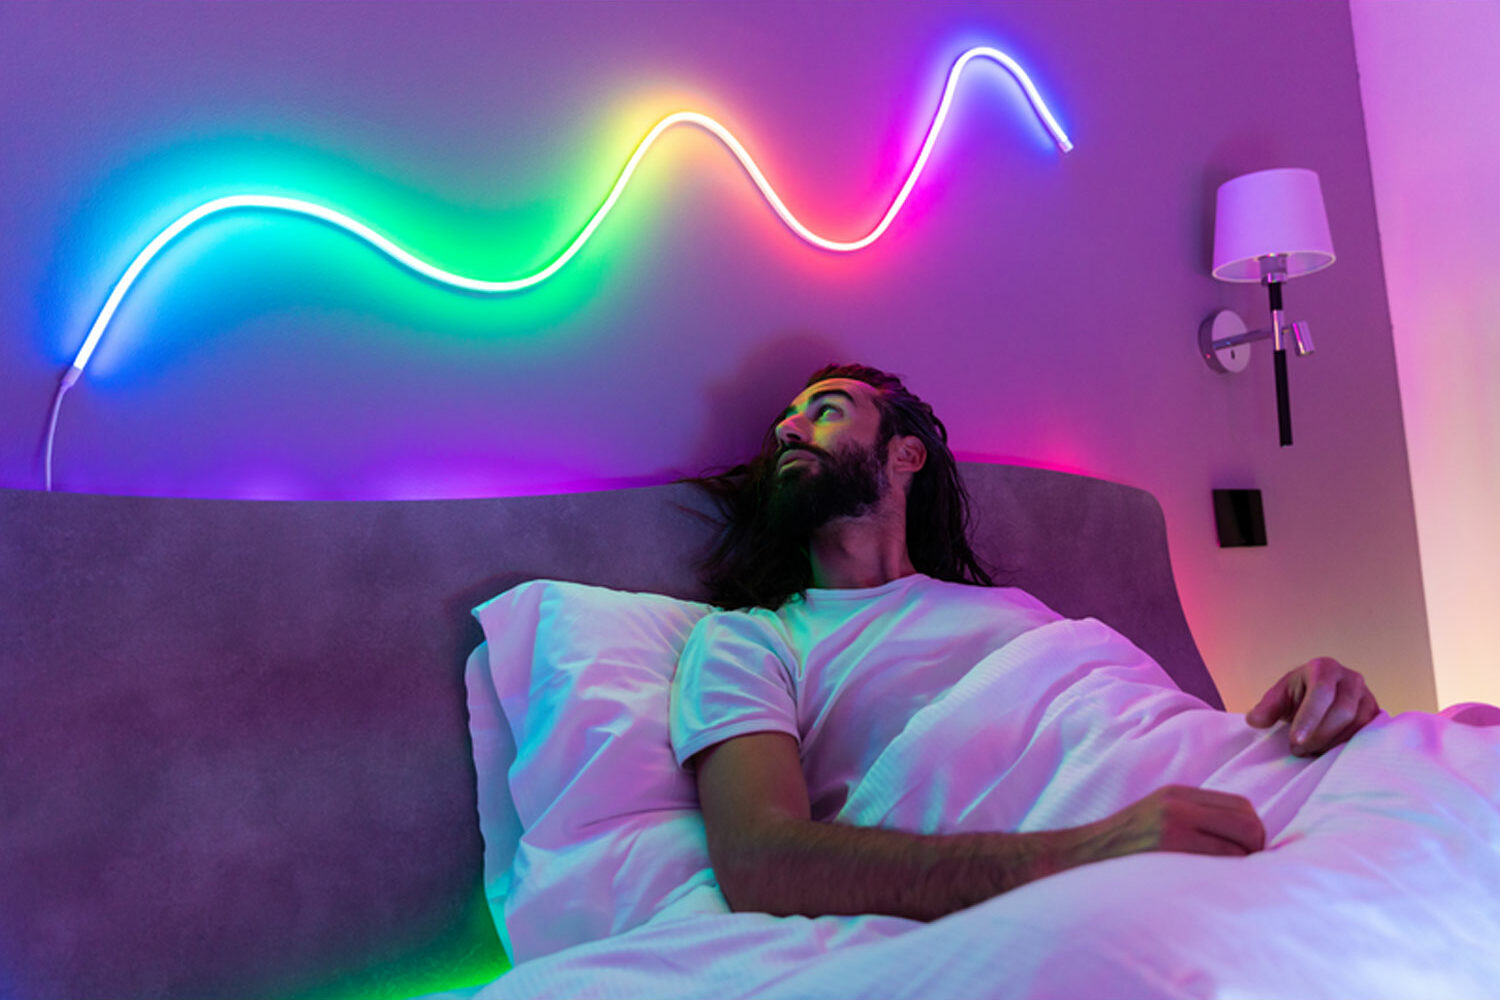 Light up your life with shapeable neon LED tube lighting that syncs to your music